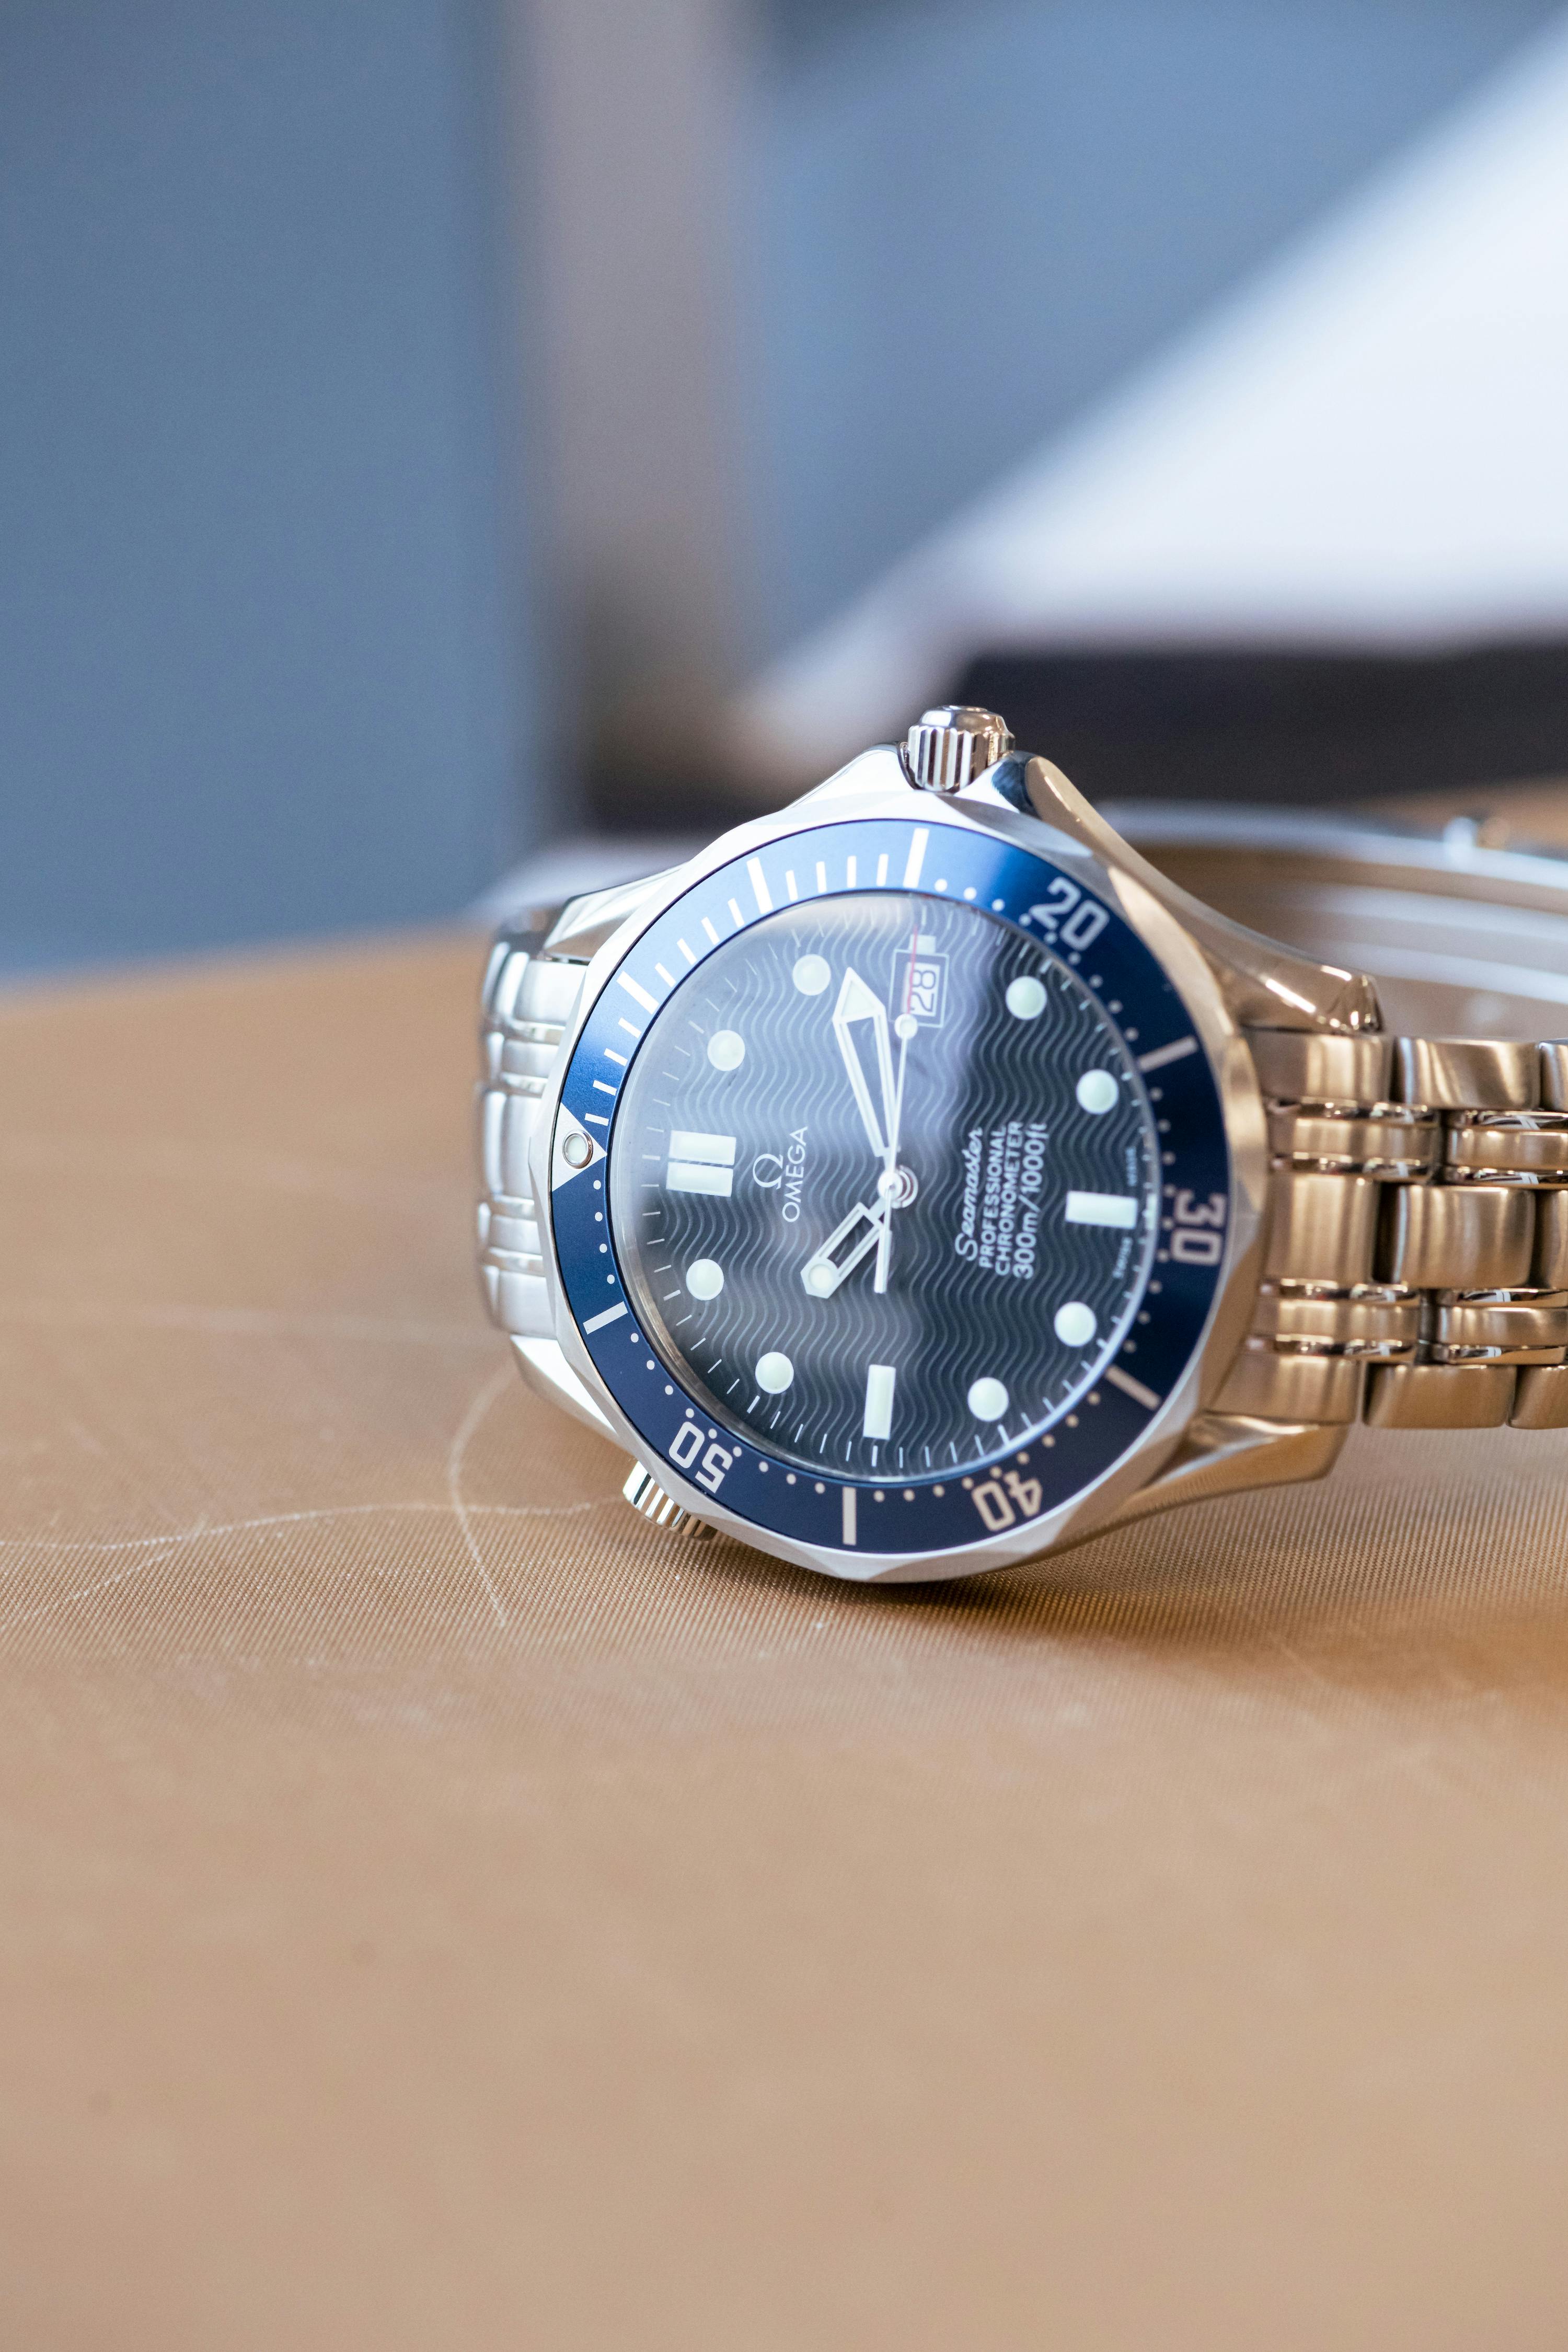 2002 OMEGA SEAMASTER 300M for sale by auction in London, United Kingdom